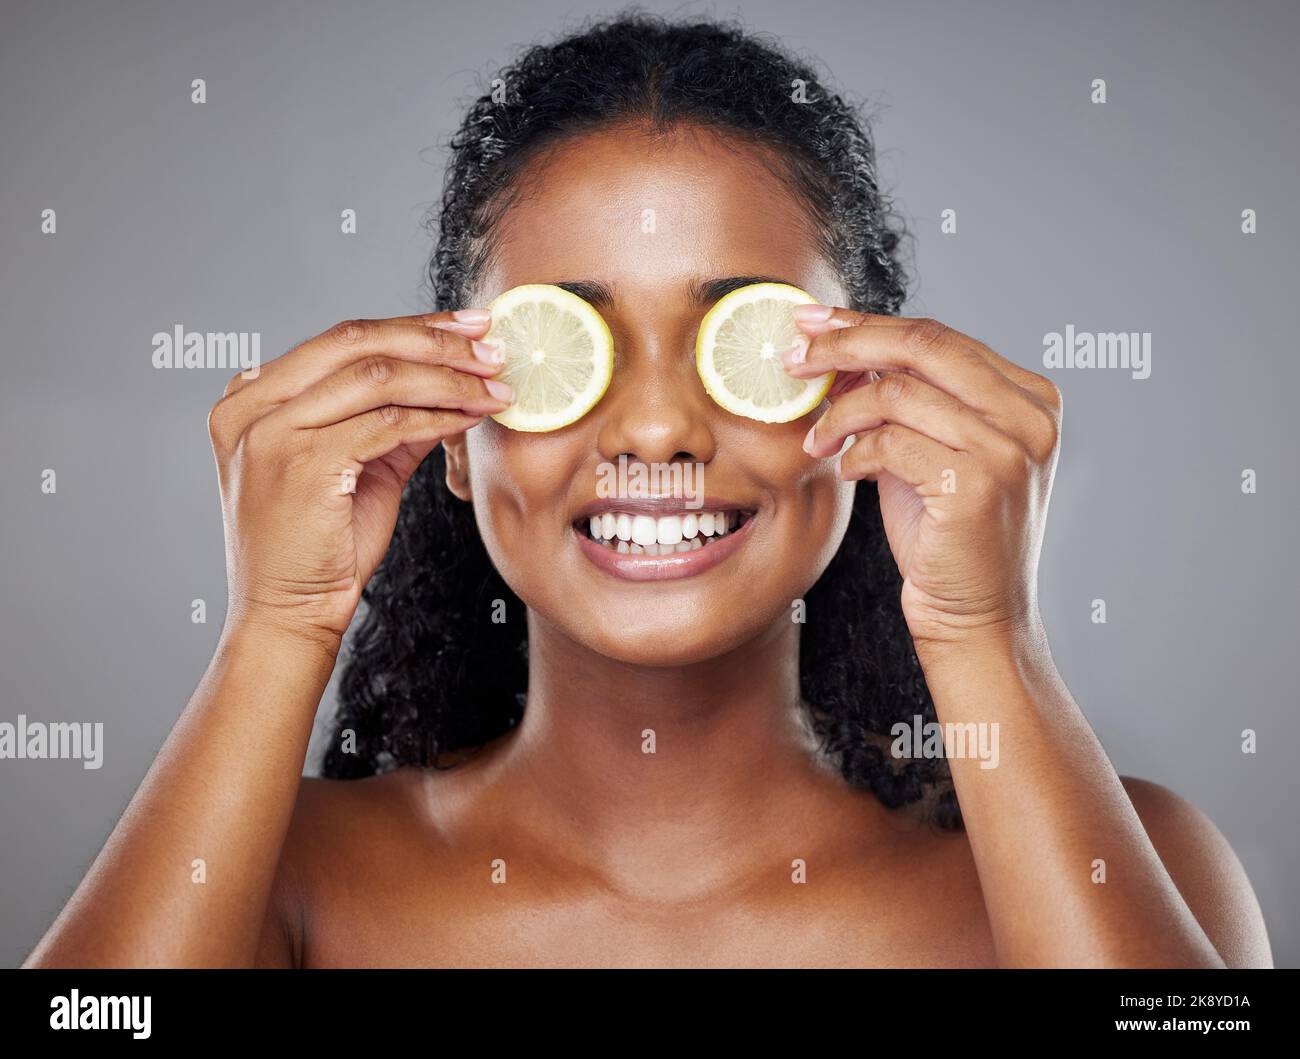 Skincare, portrait and woman with lemon on her eyes for health, beauty and wellness standing in a studio. Happy, smile and face of girl model from Stock Photo